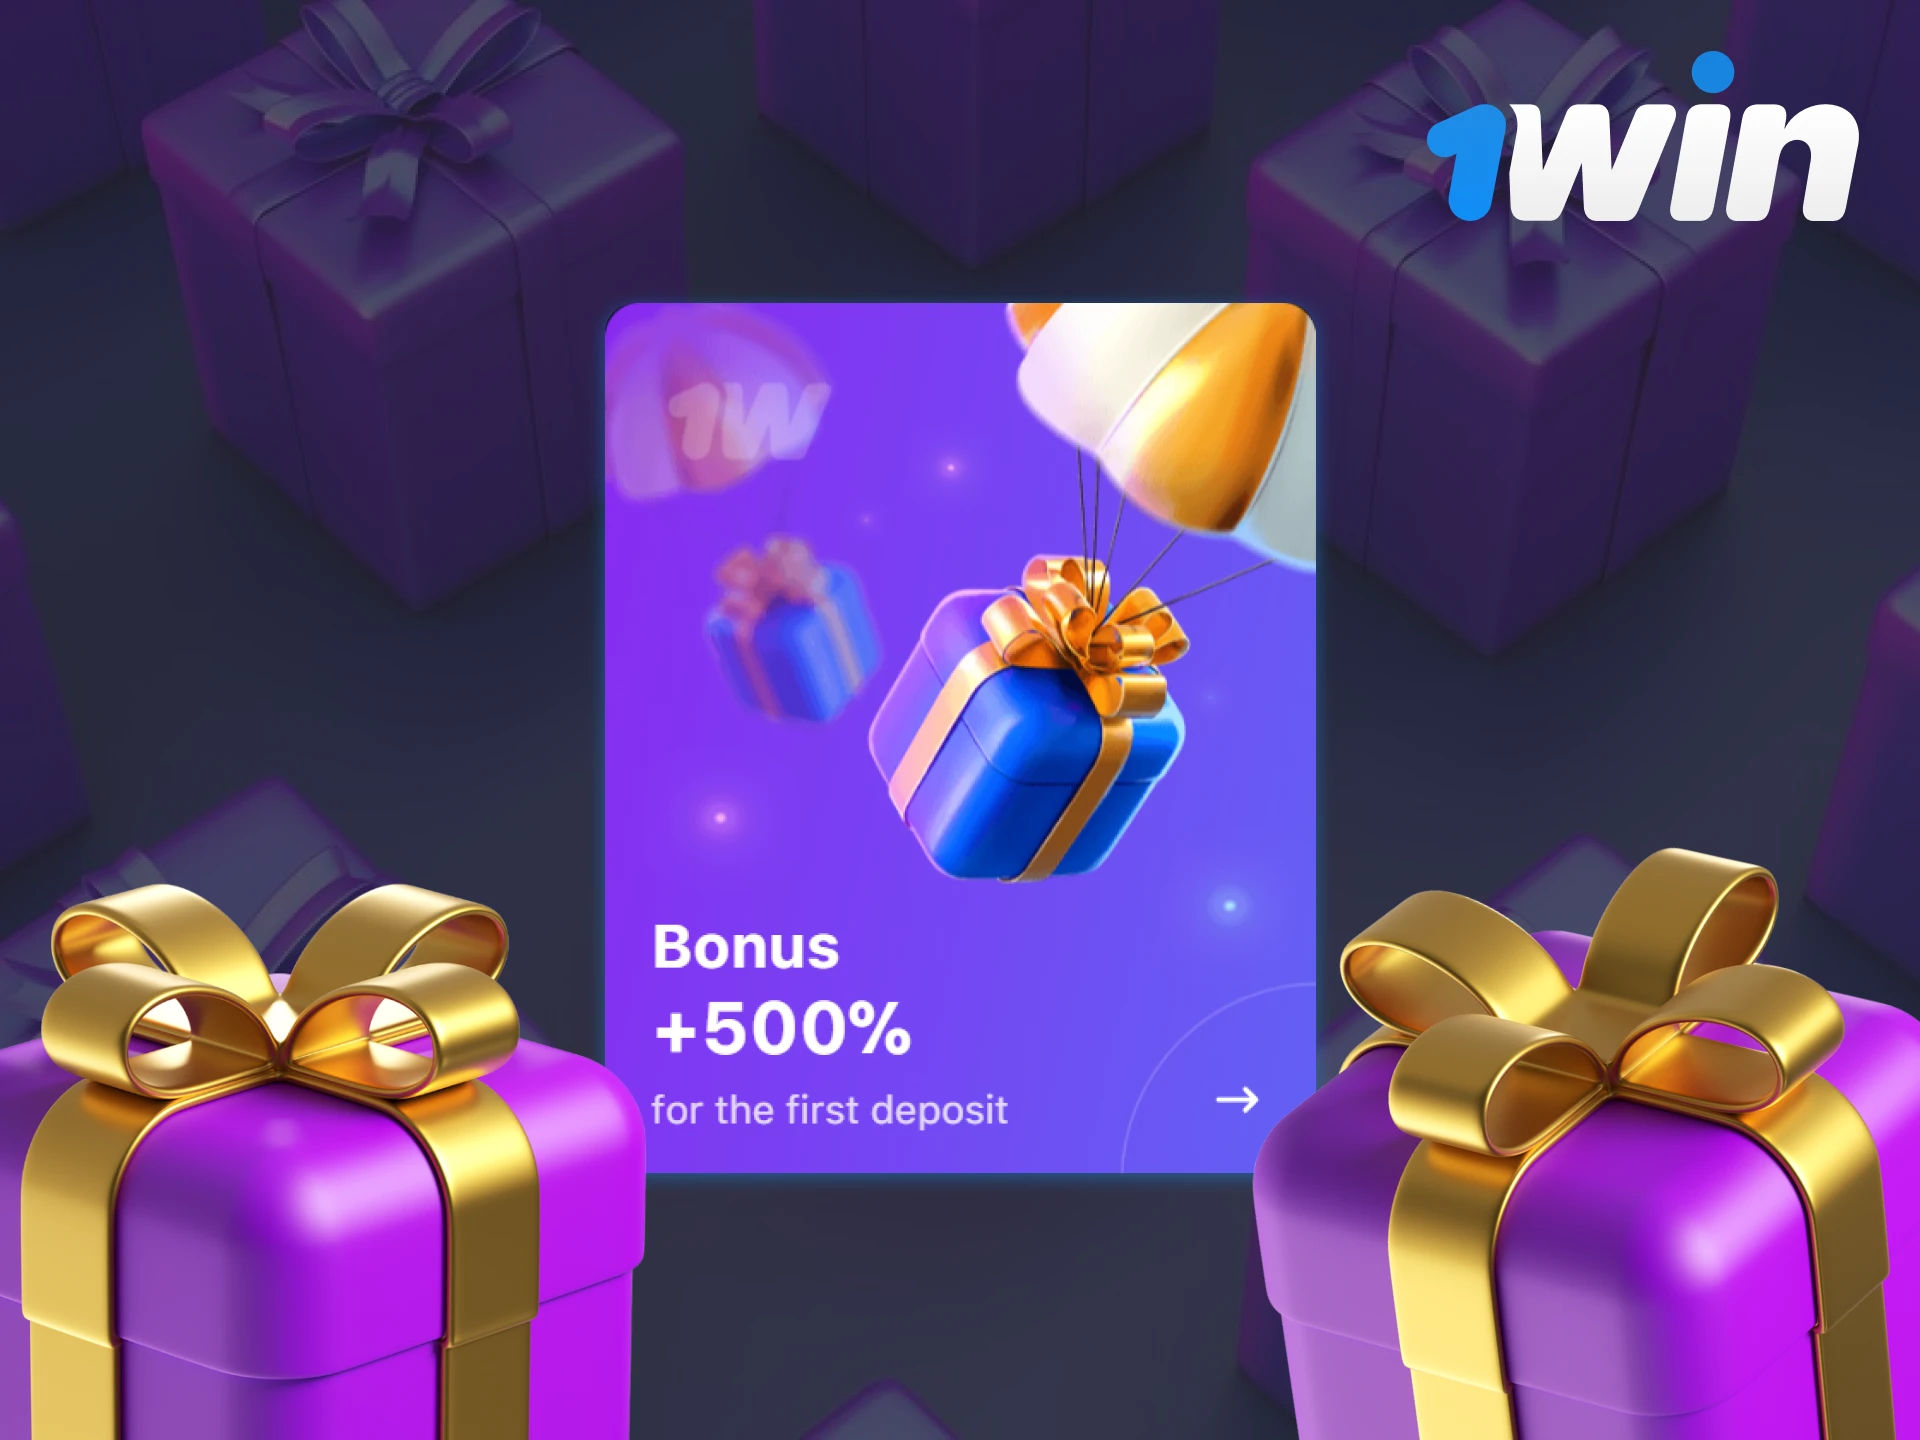 After registering with 1Win, you can receive a welcome bonus for sports and casino betting.